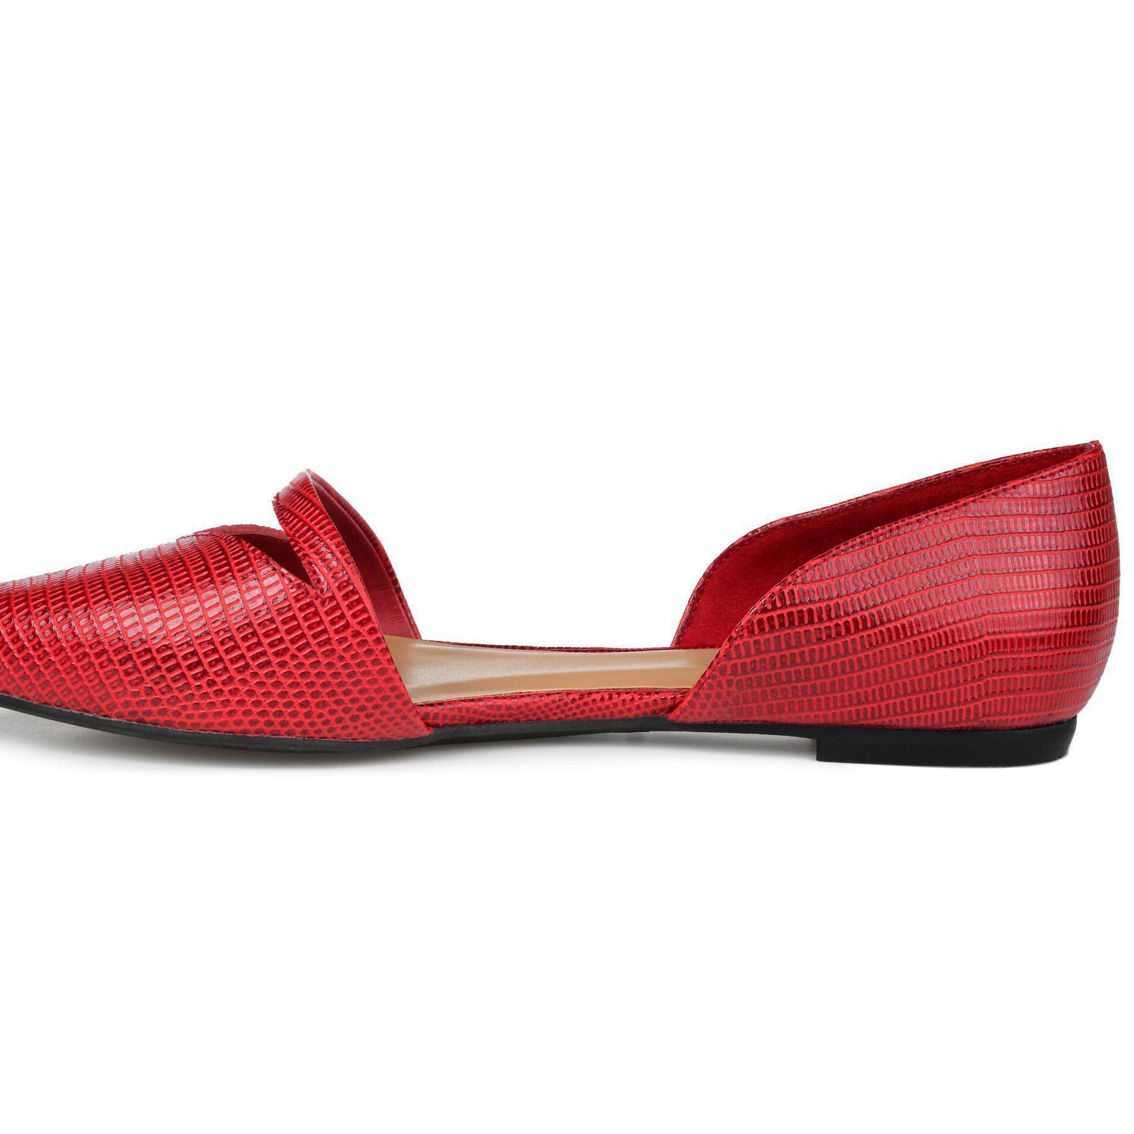 Journee Collection Women's Braely Flat - Image 4 of 5